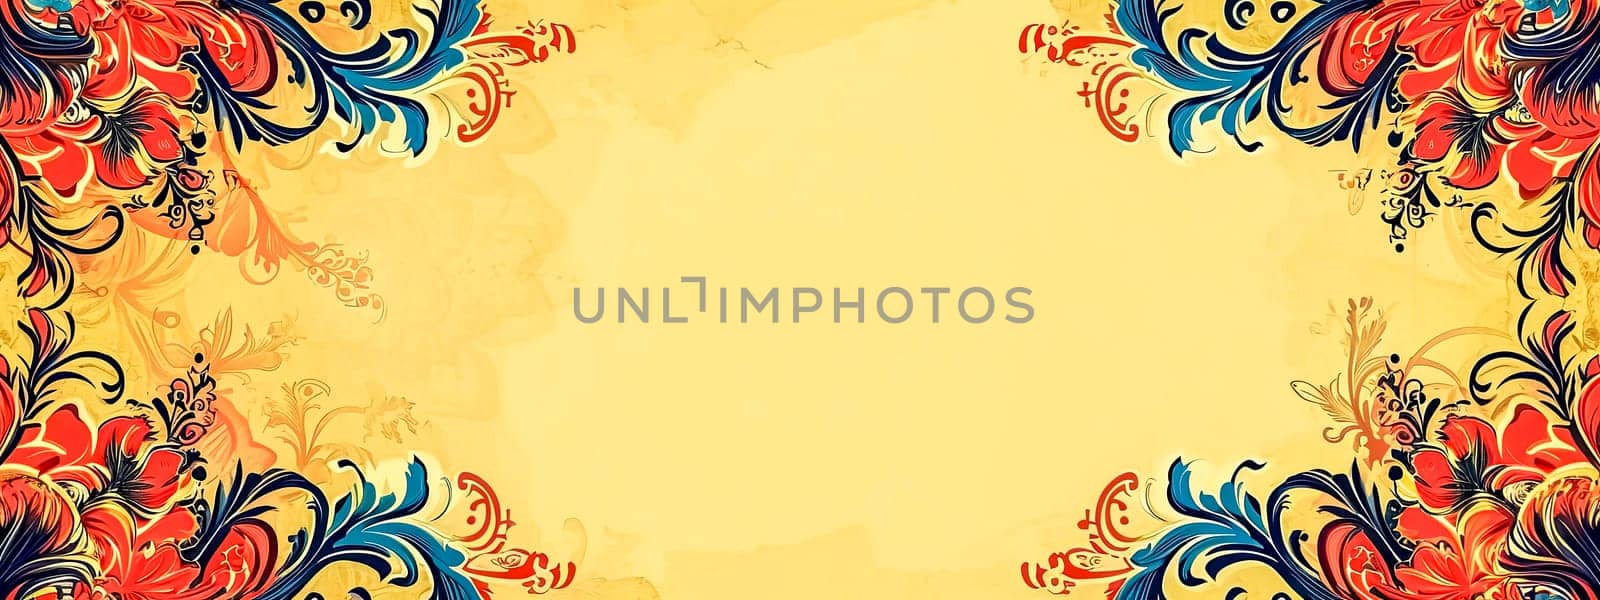 an ornate and decorative border with a vintage feel, featuring intricate swirls and floral designs in rich red and blue hues on a warm, yellowed parchment background. by Edophoto